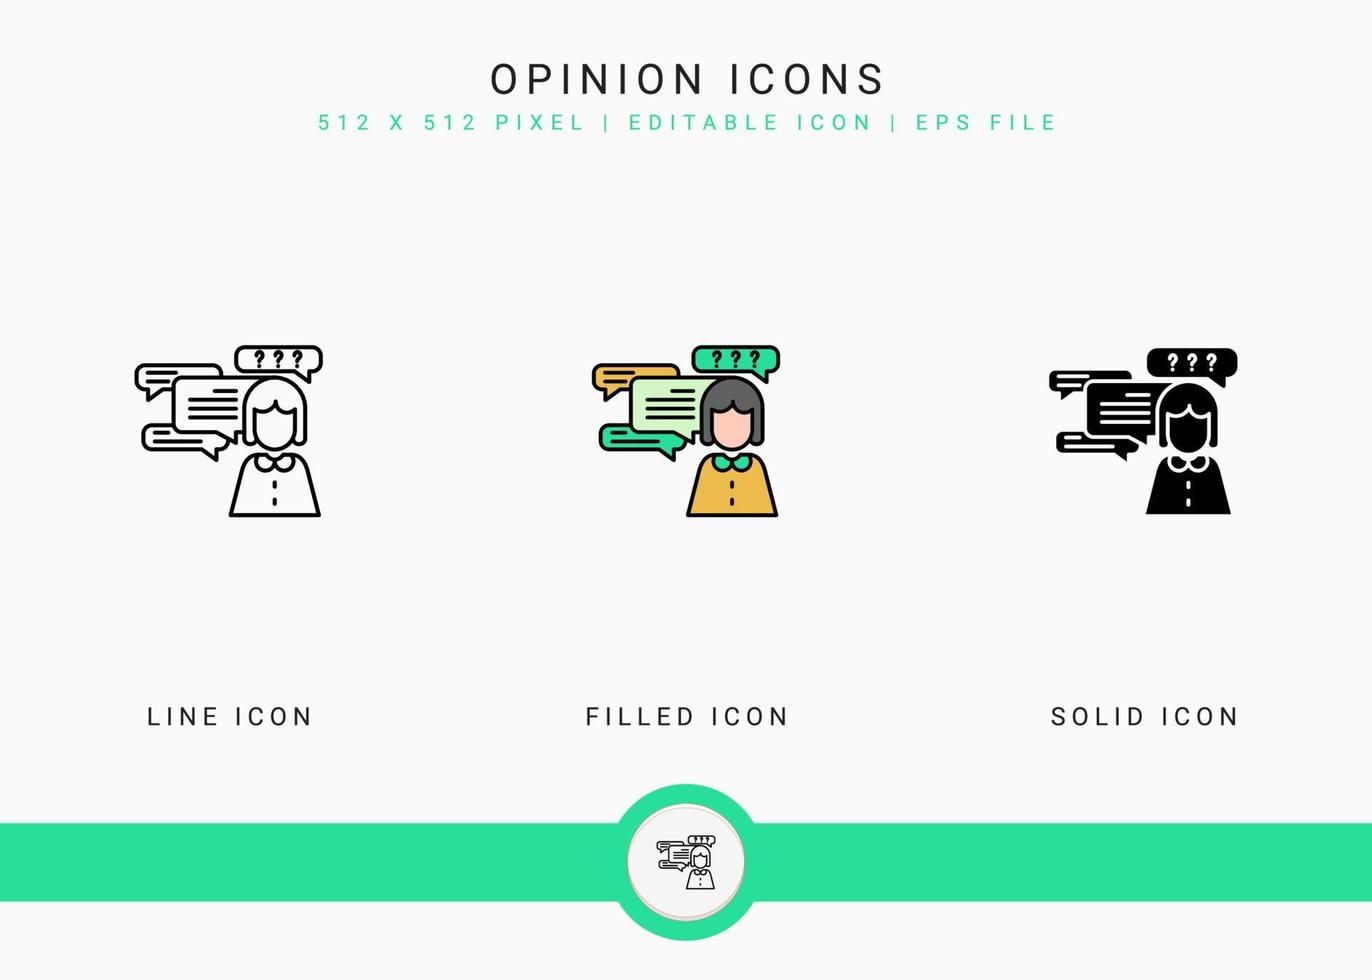 Opinion icons set vector illustration with solid icon line style. Customer satisfaction check concept. Editable stroke icon on isolated background for web design, infographic and UI mobile app.